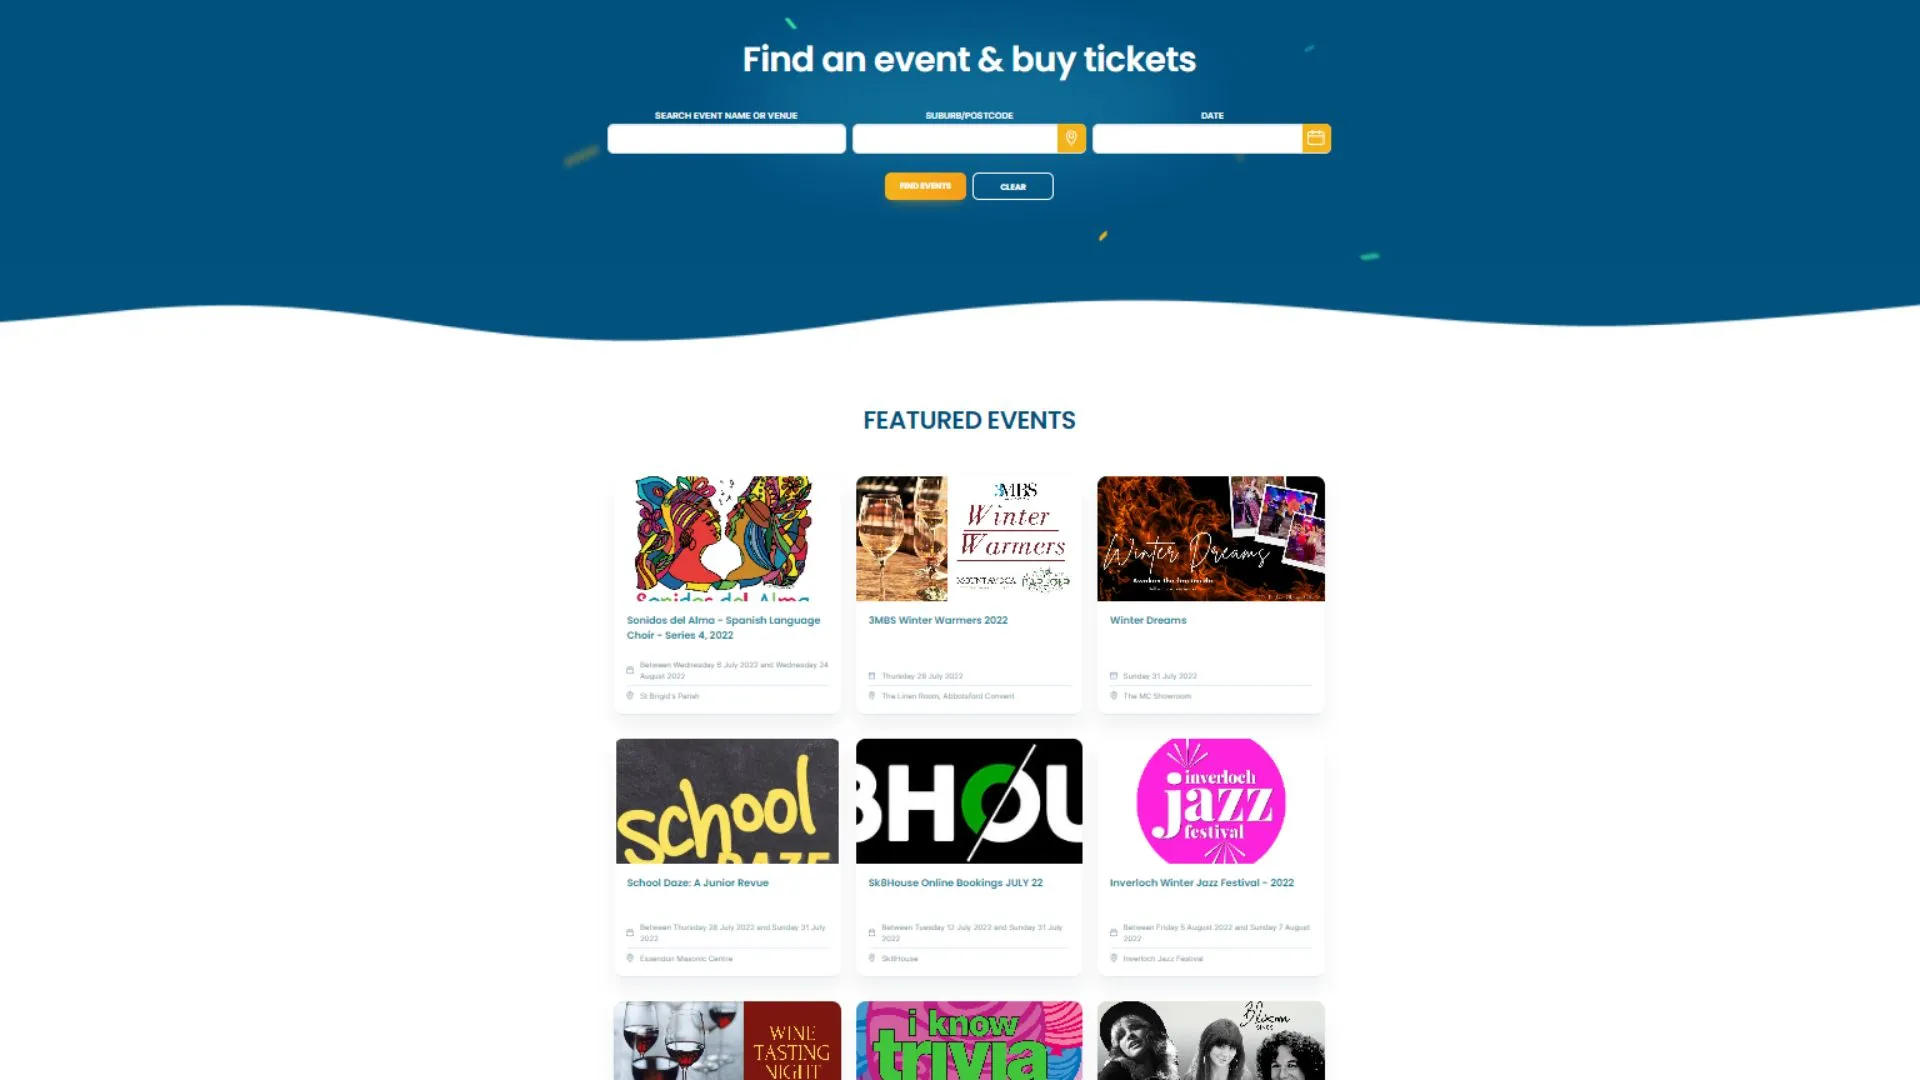 How to Use Event Discounts and Promo Codes to Sell More Tickets